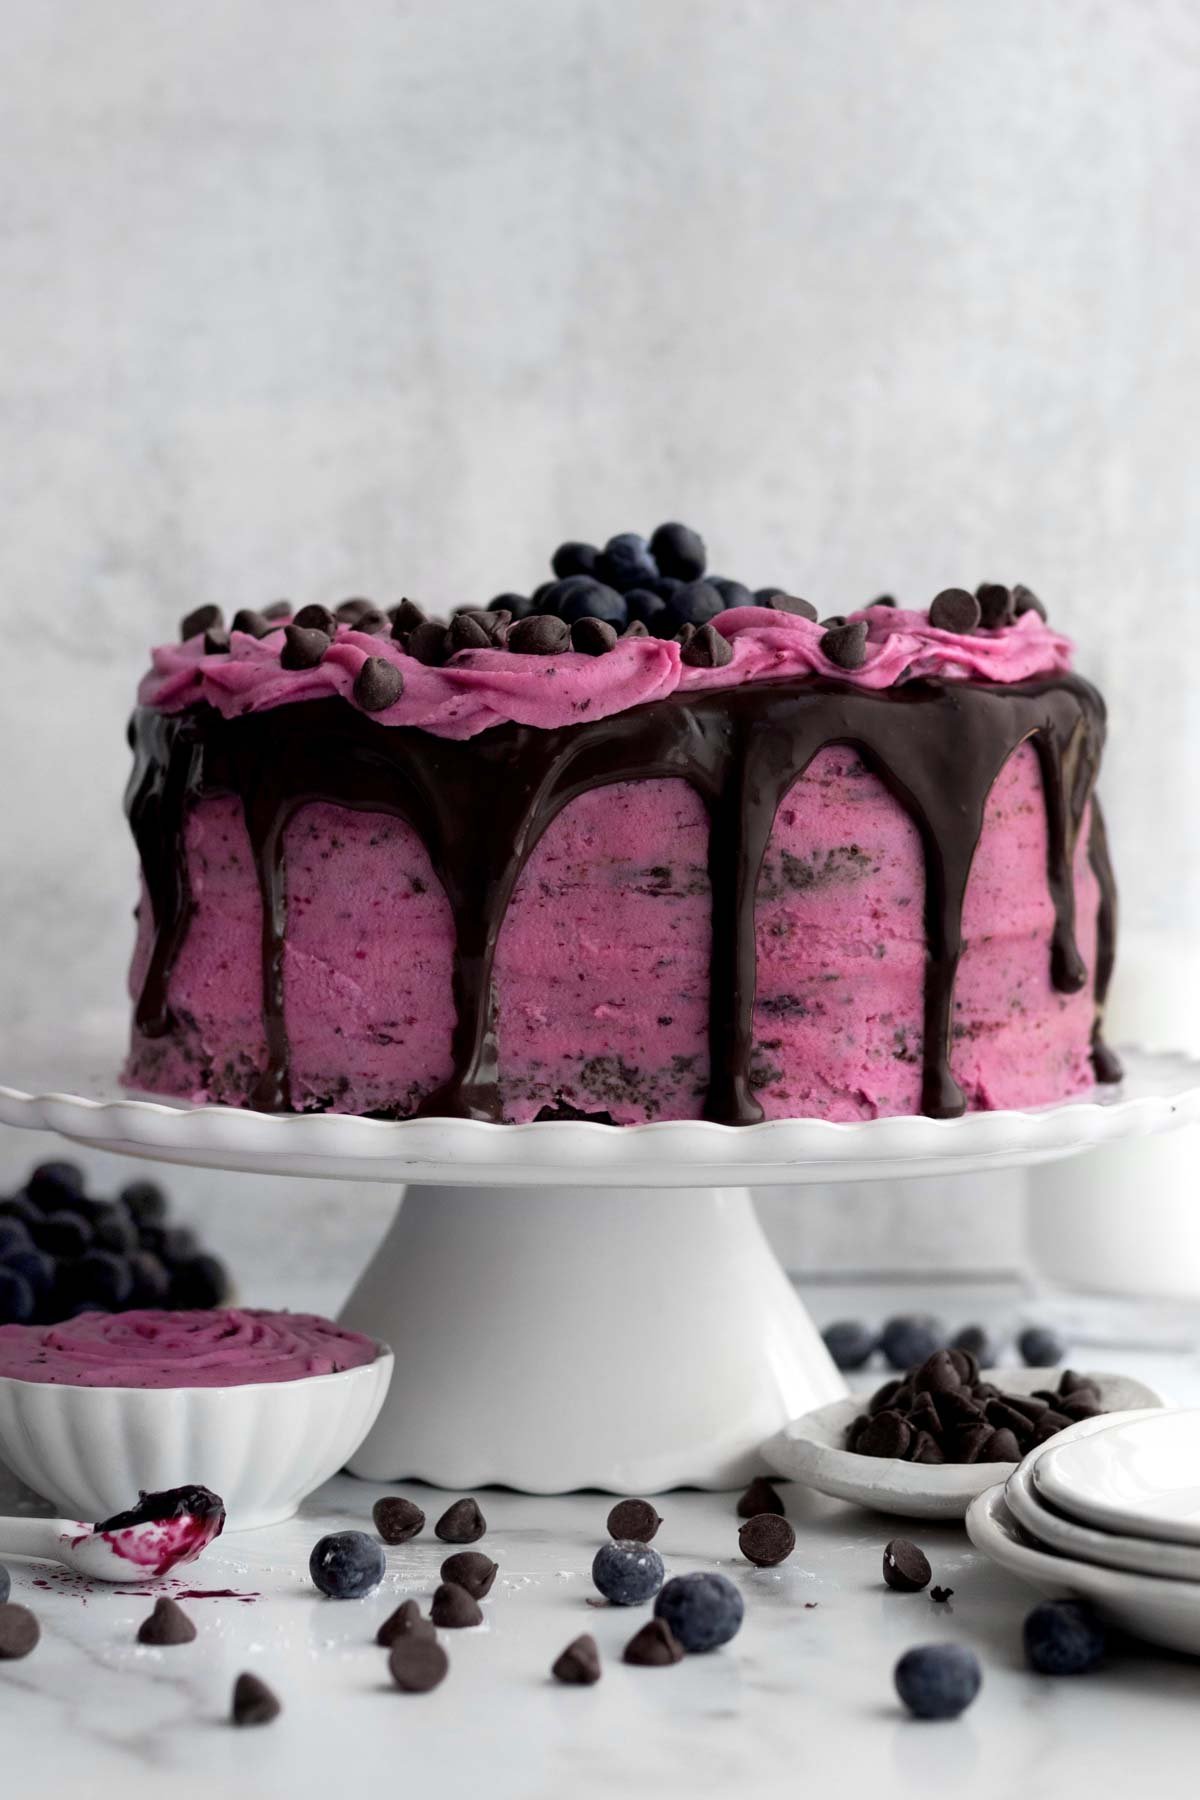 A cake with Blueberry Frosting dripping in chocolate ganache.